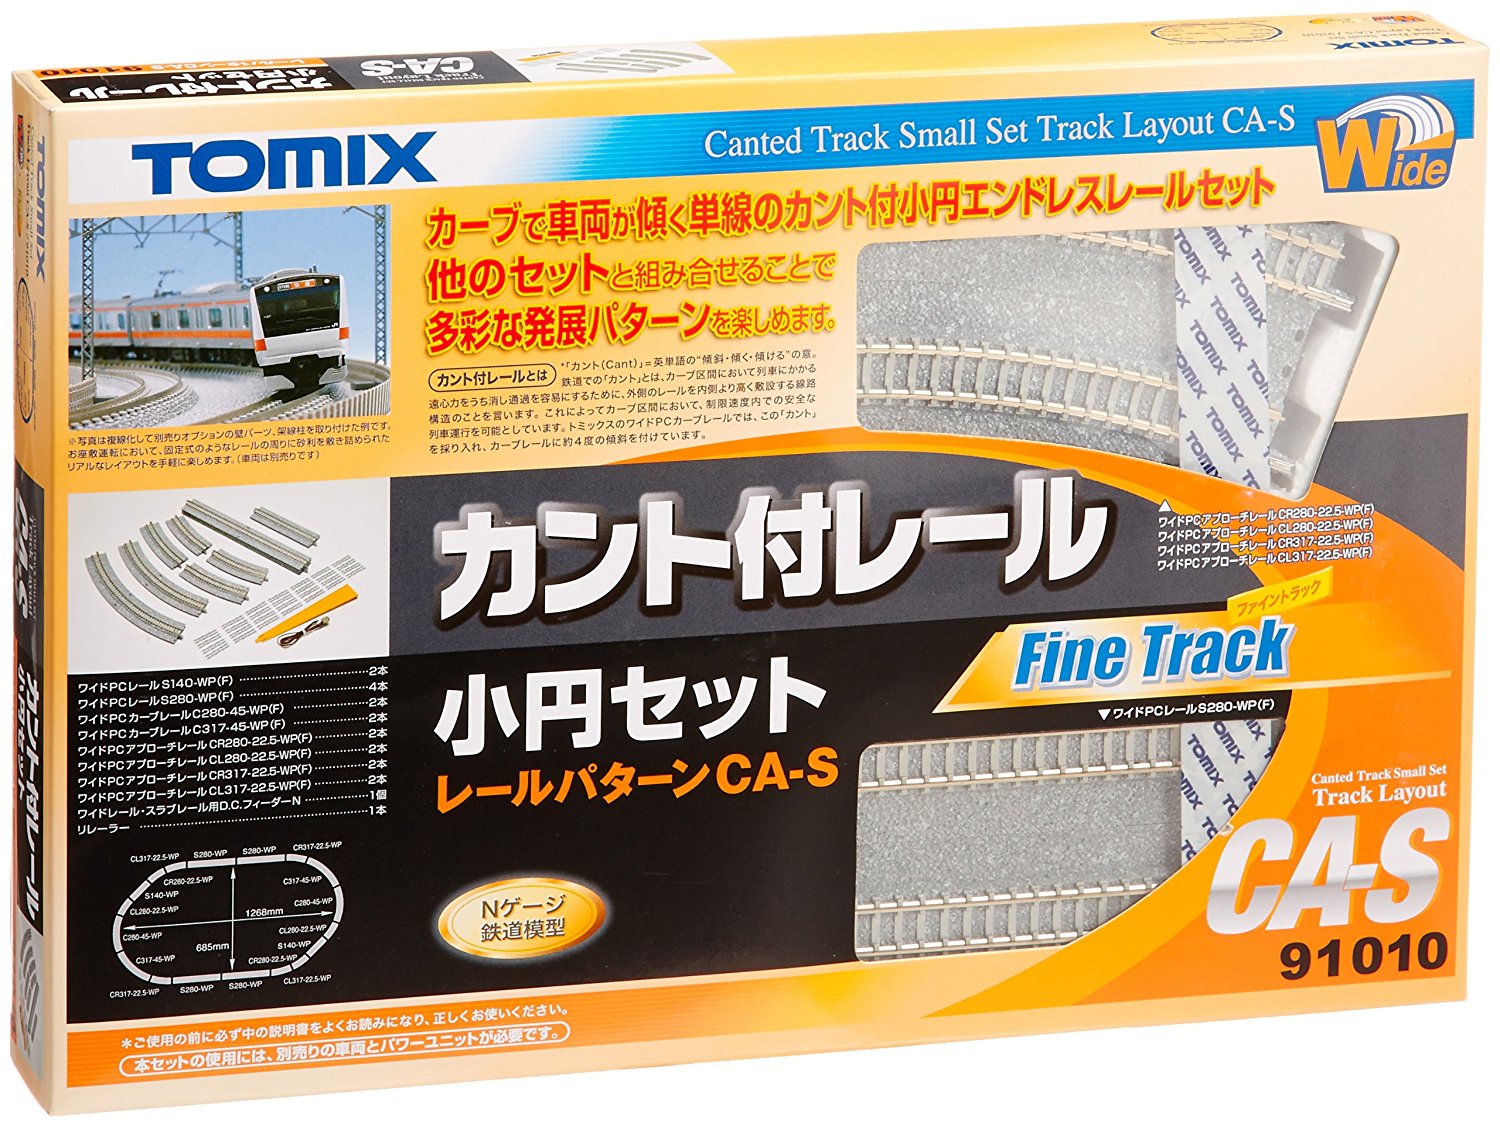 Fine Track Canted Track Small Set (Track Layout CA-S)